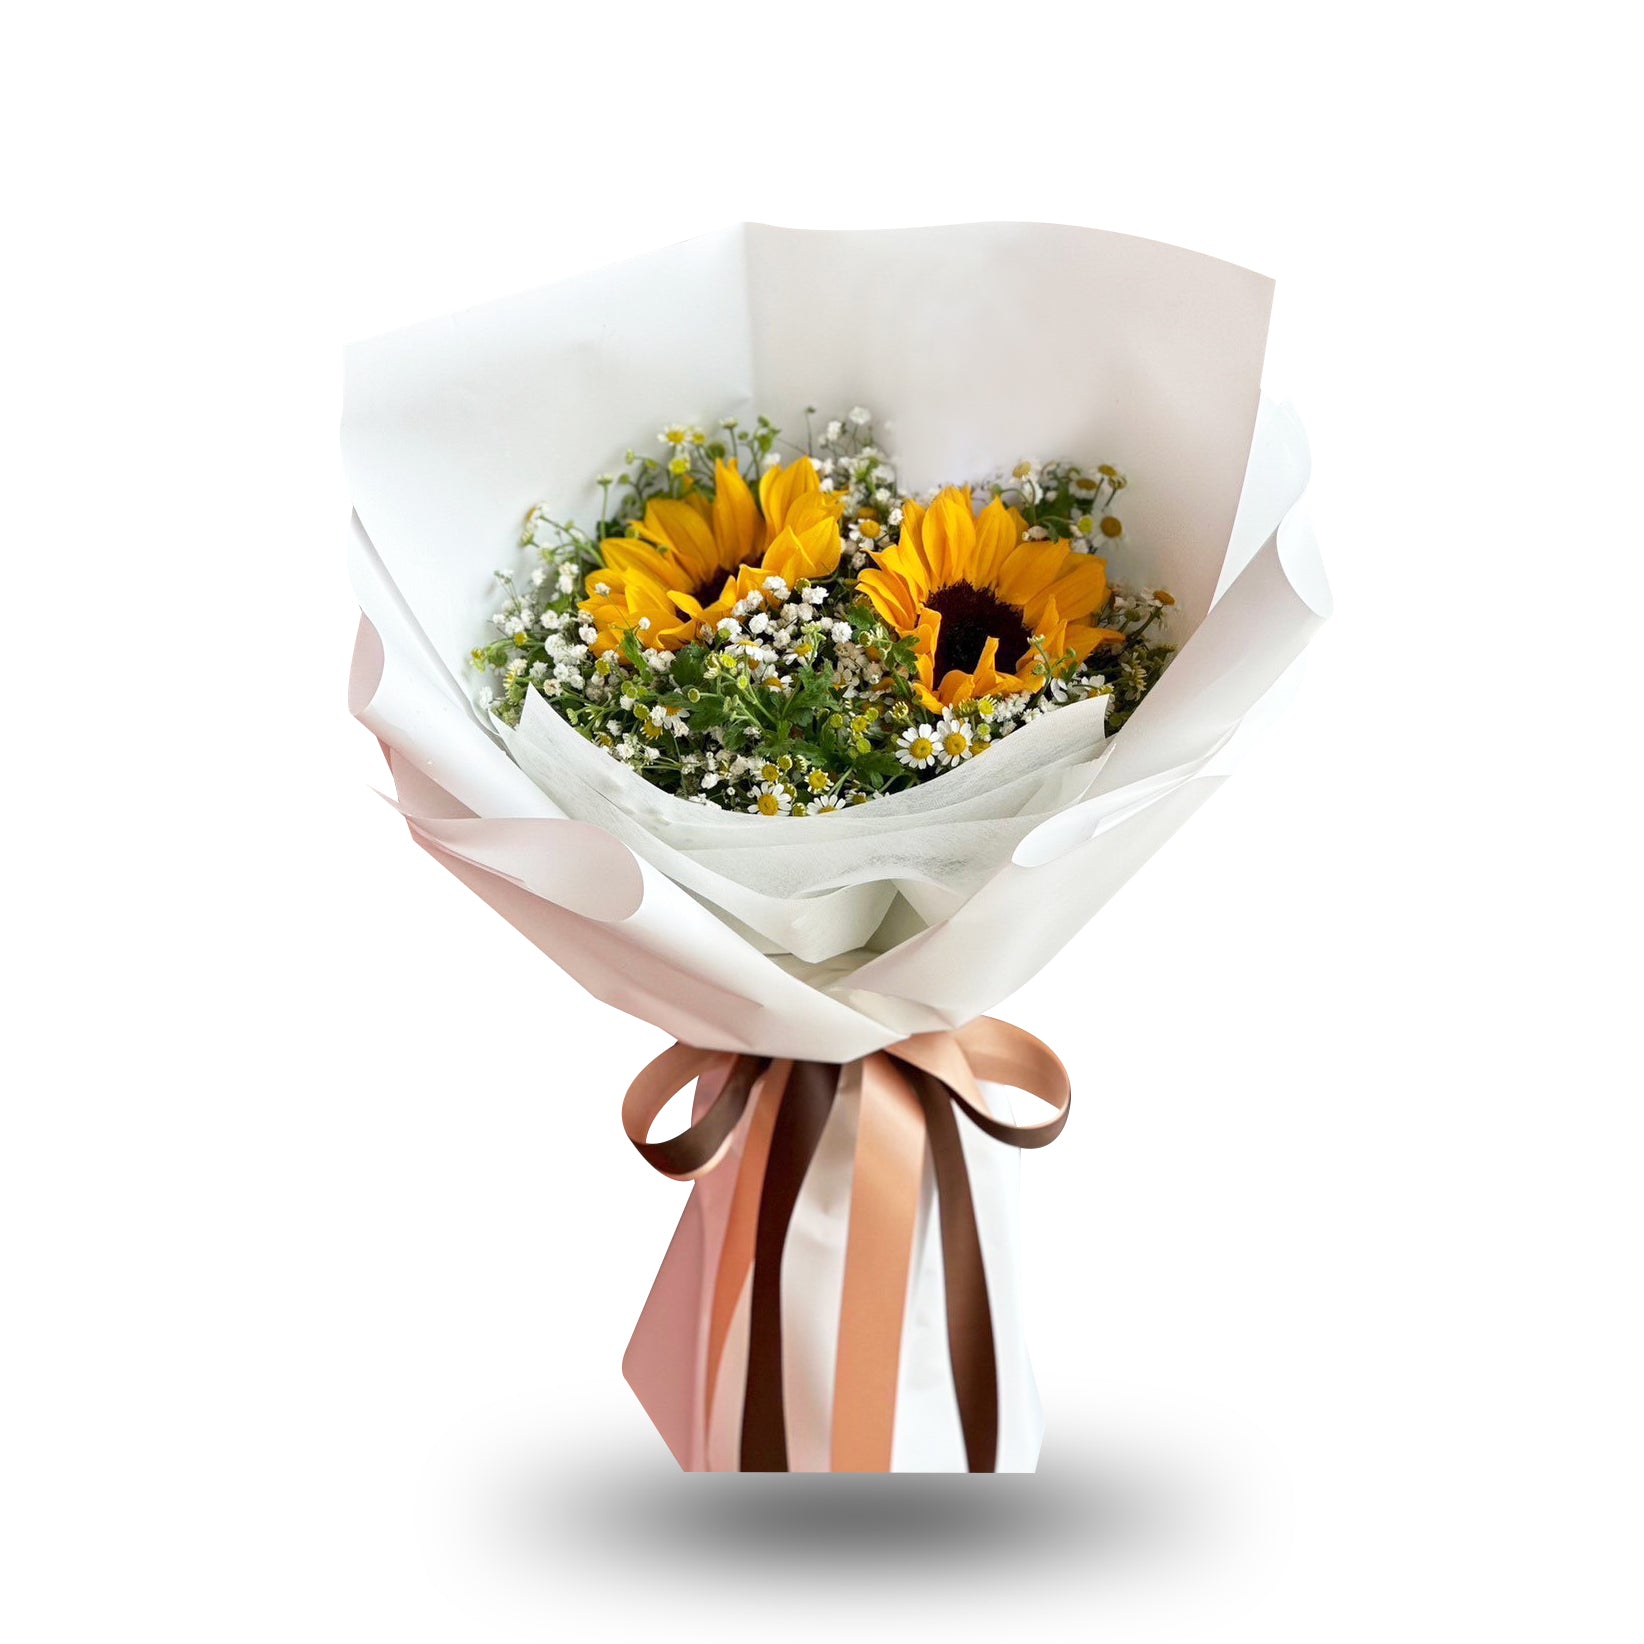 Sweet Bouquet Of Sunflowers mixed with Daisy